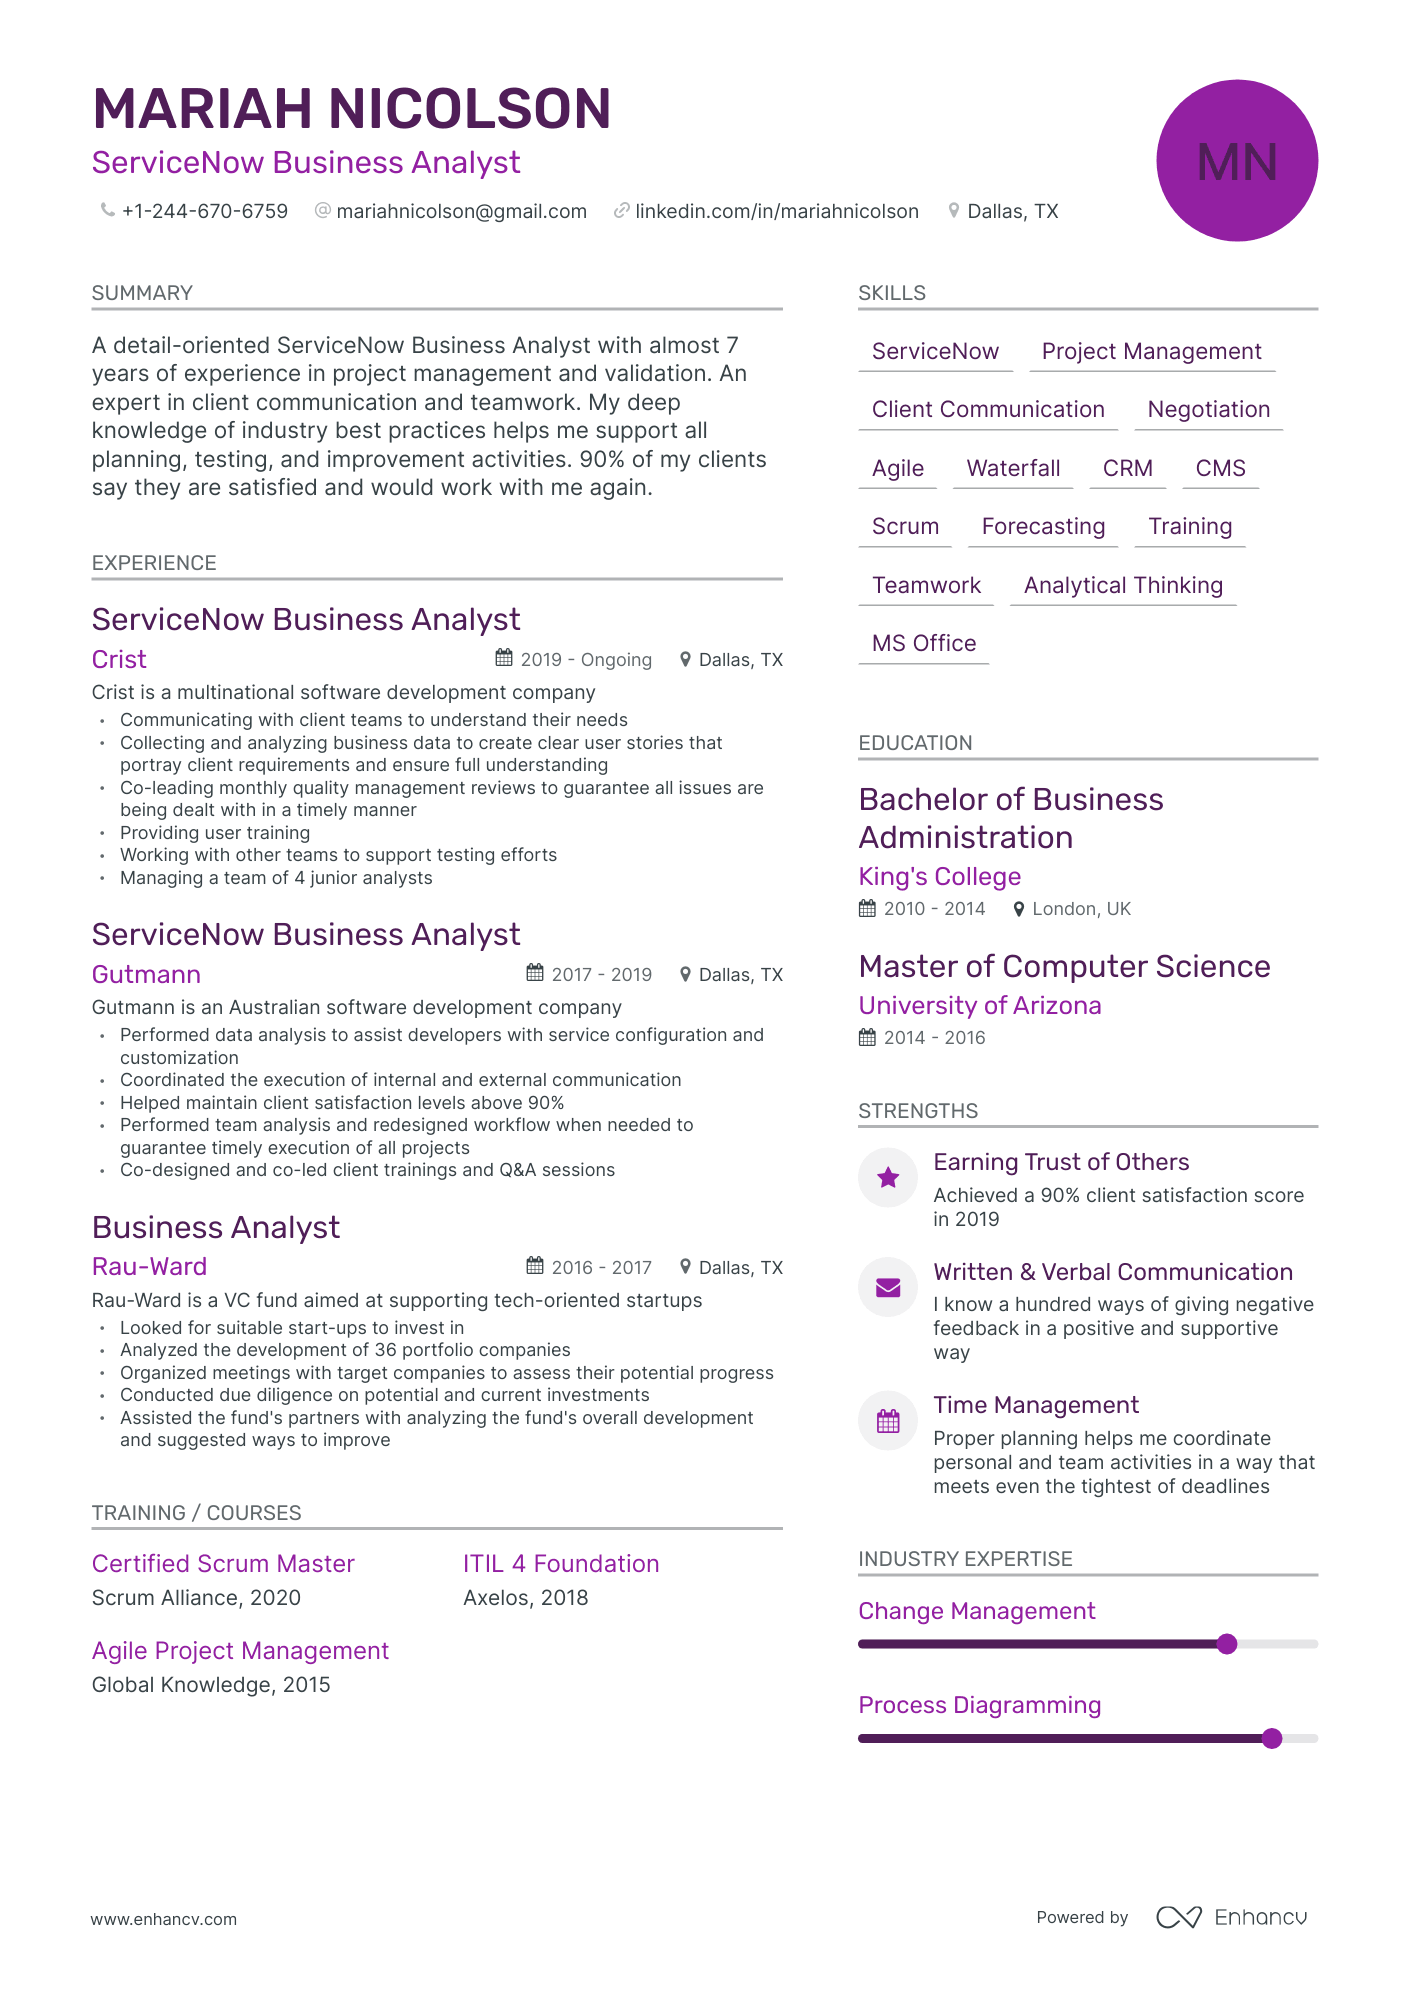 Modern ServiceNow Business Analyst Resume Template